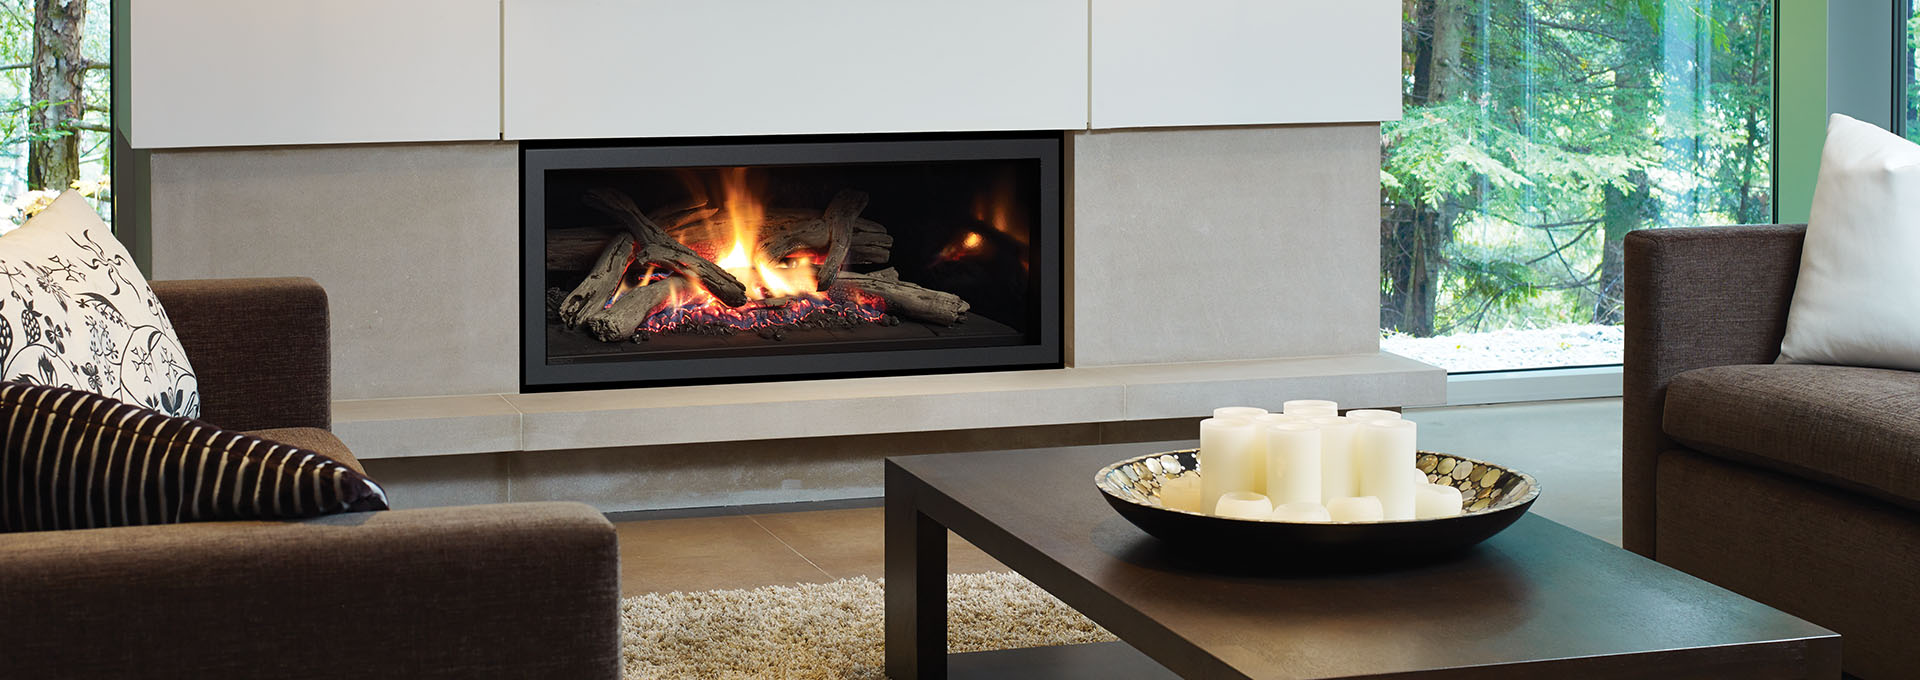 gas fire place installations